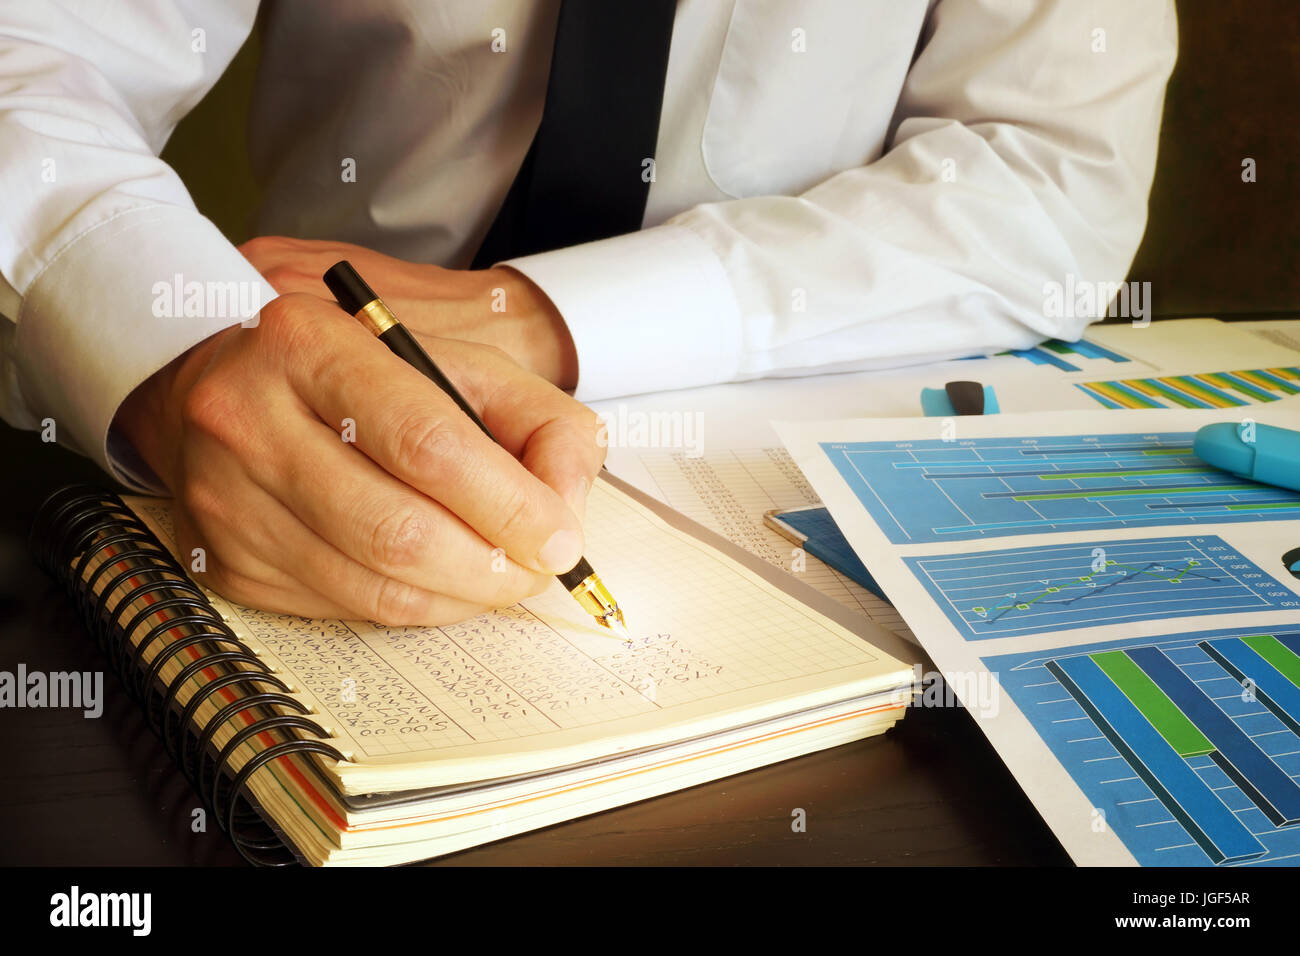 Accounting concept. Manager writing financial data into ledger book. Stock Photo